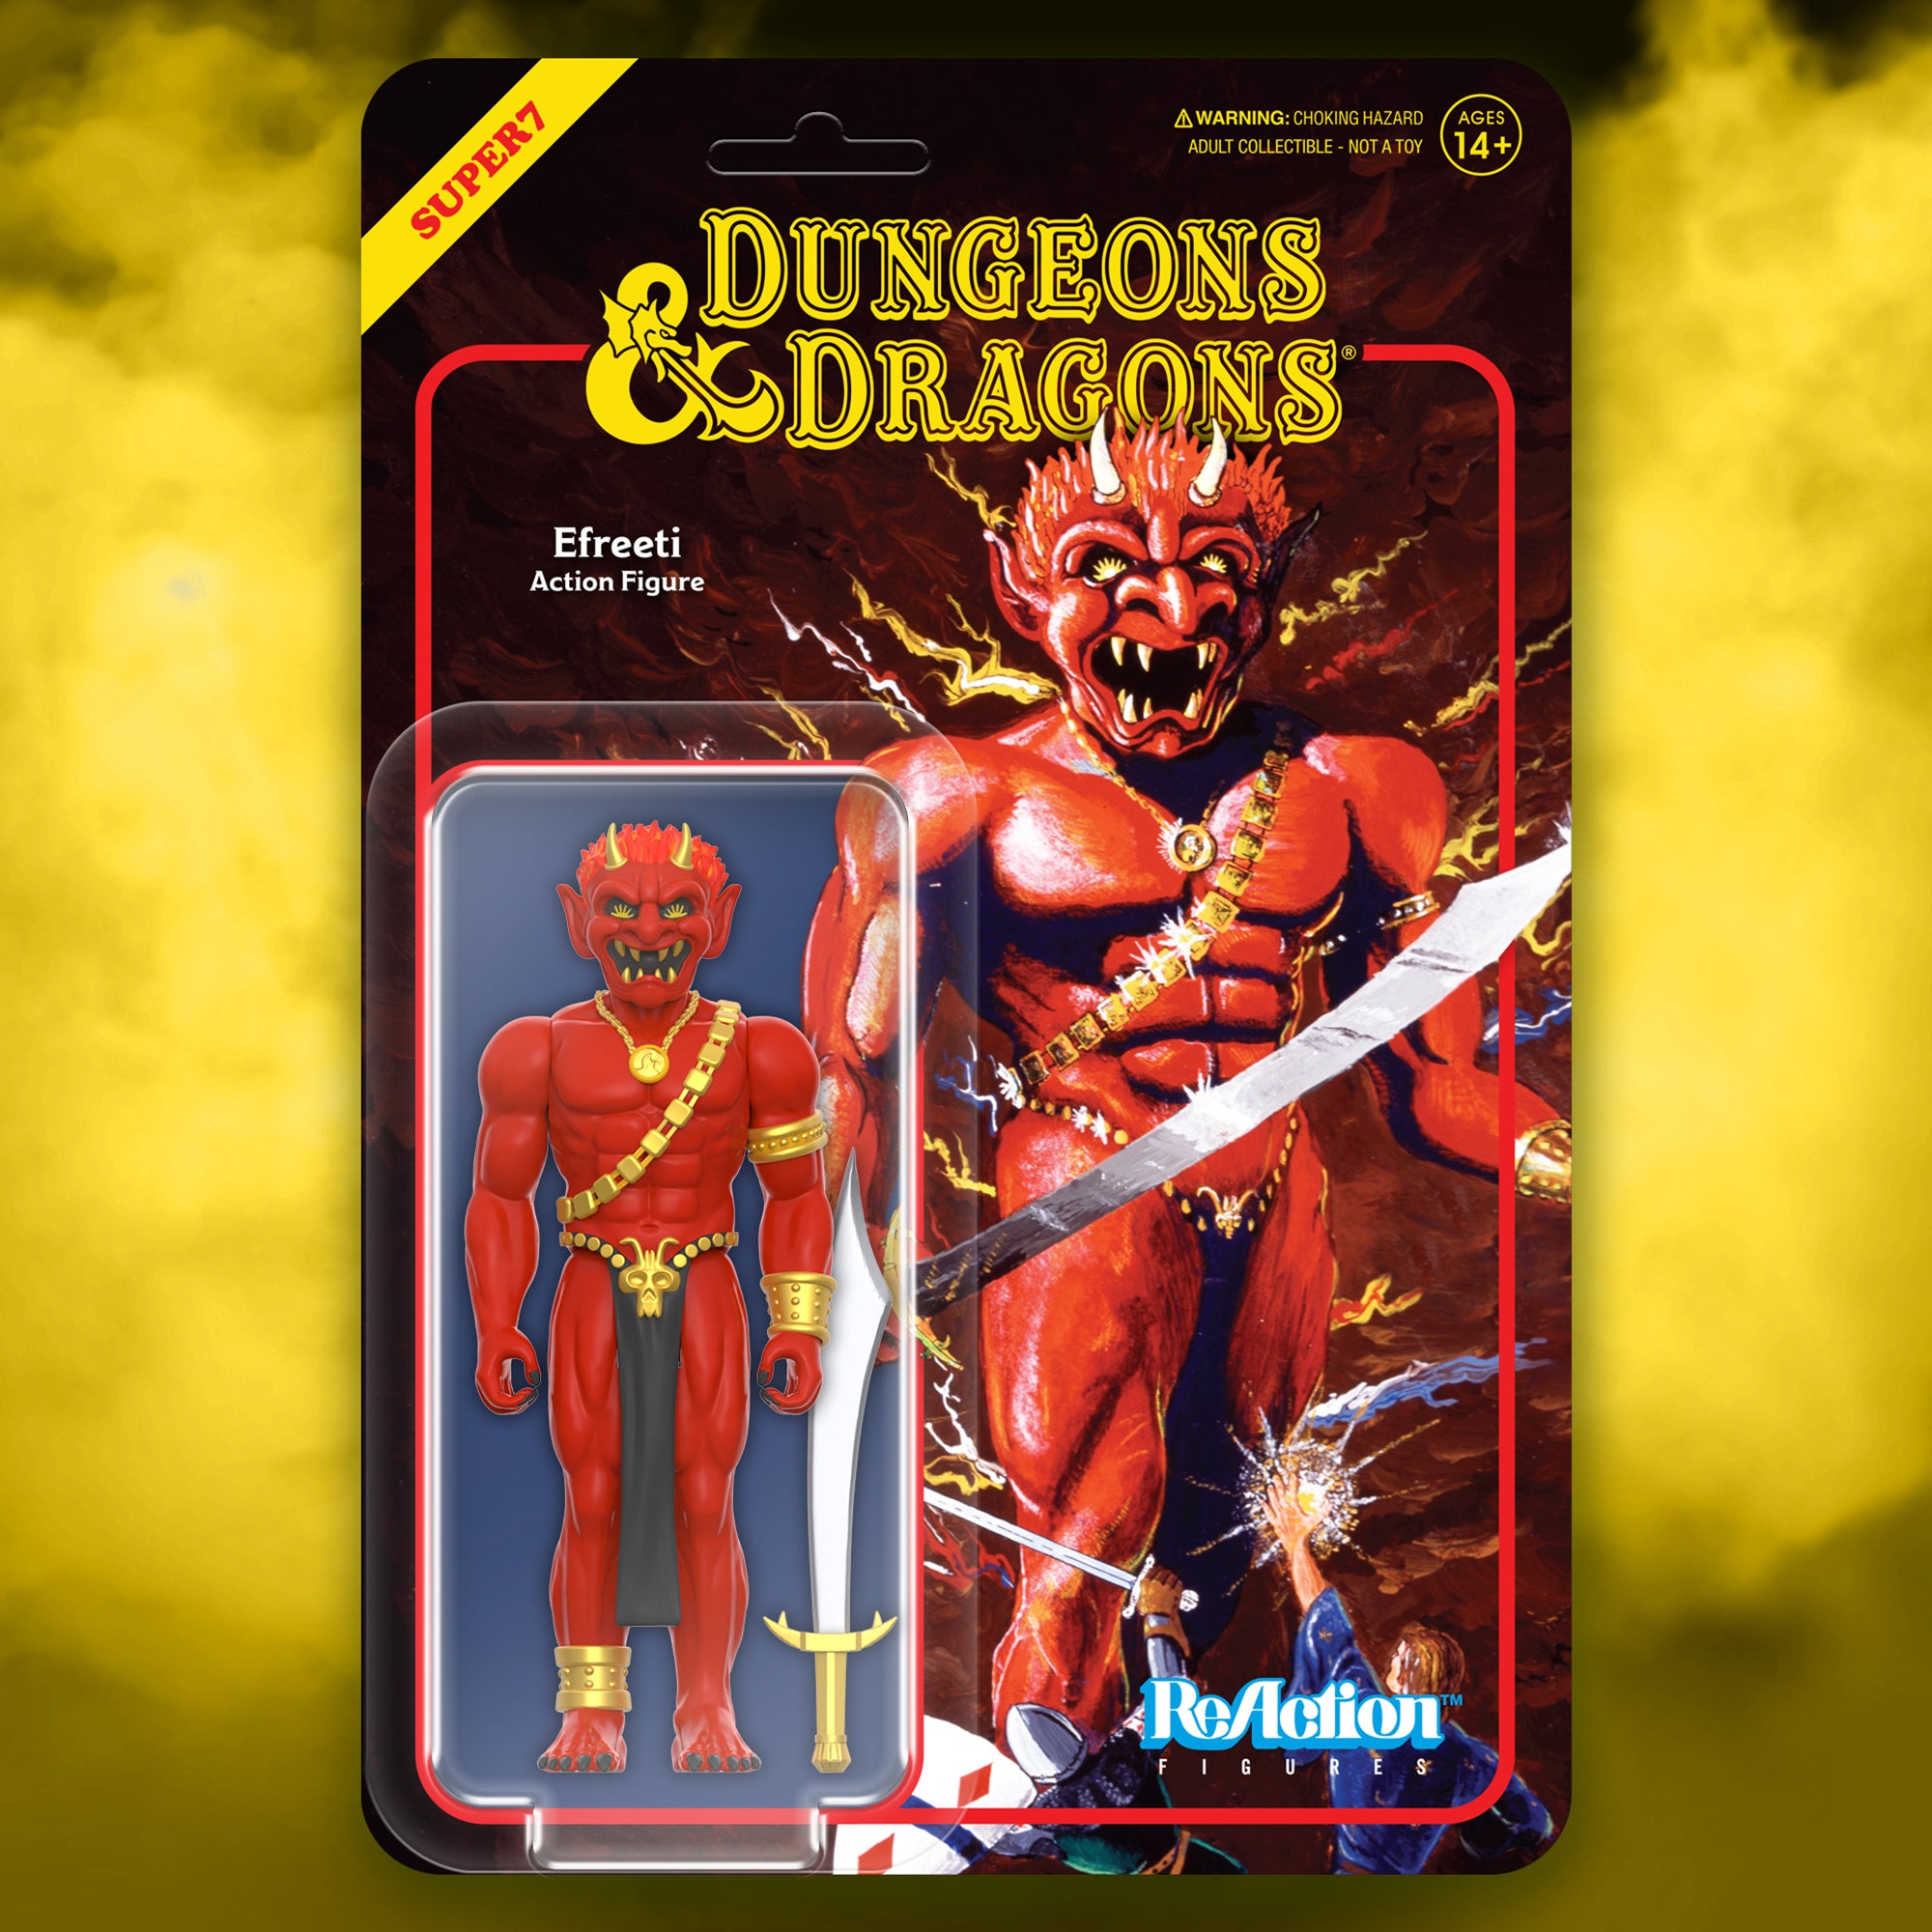 In Stock Hasbro Dungeons & Dragons Cartoon Classics Dungeon Master & Venger  Action Figure Collectible Game Model Toys Gifts